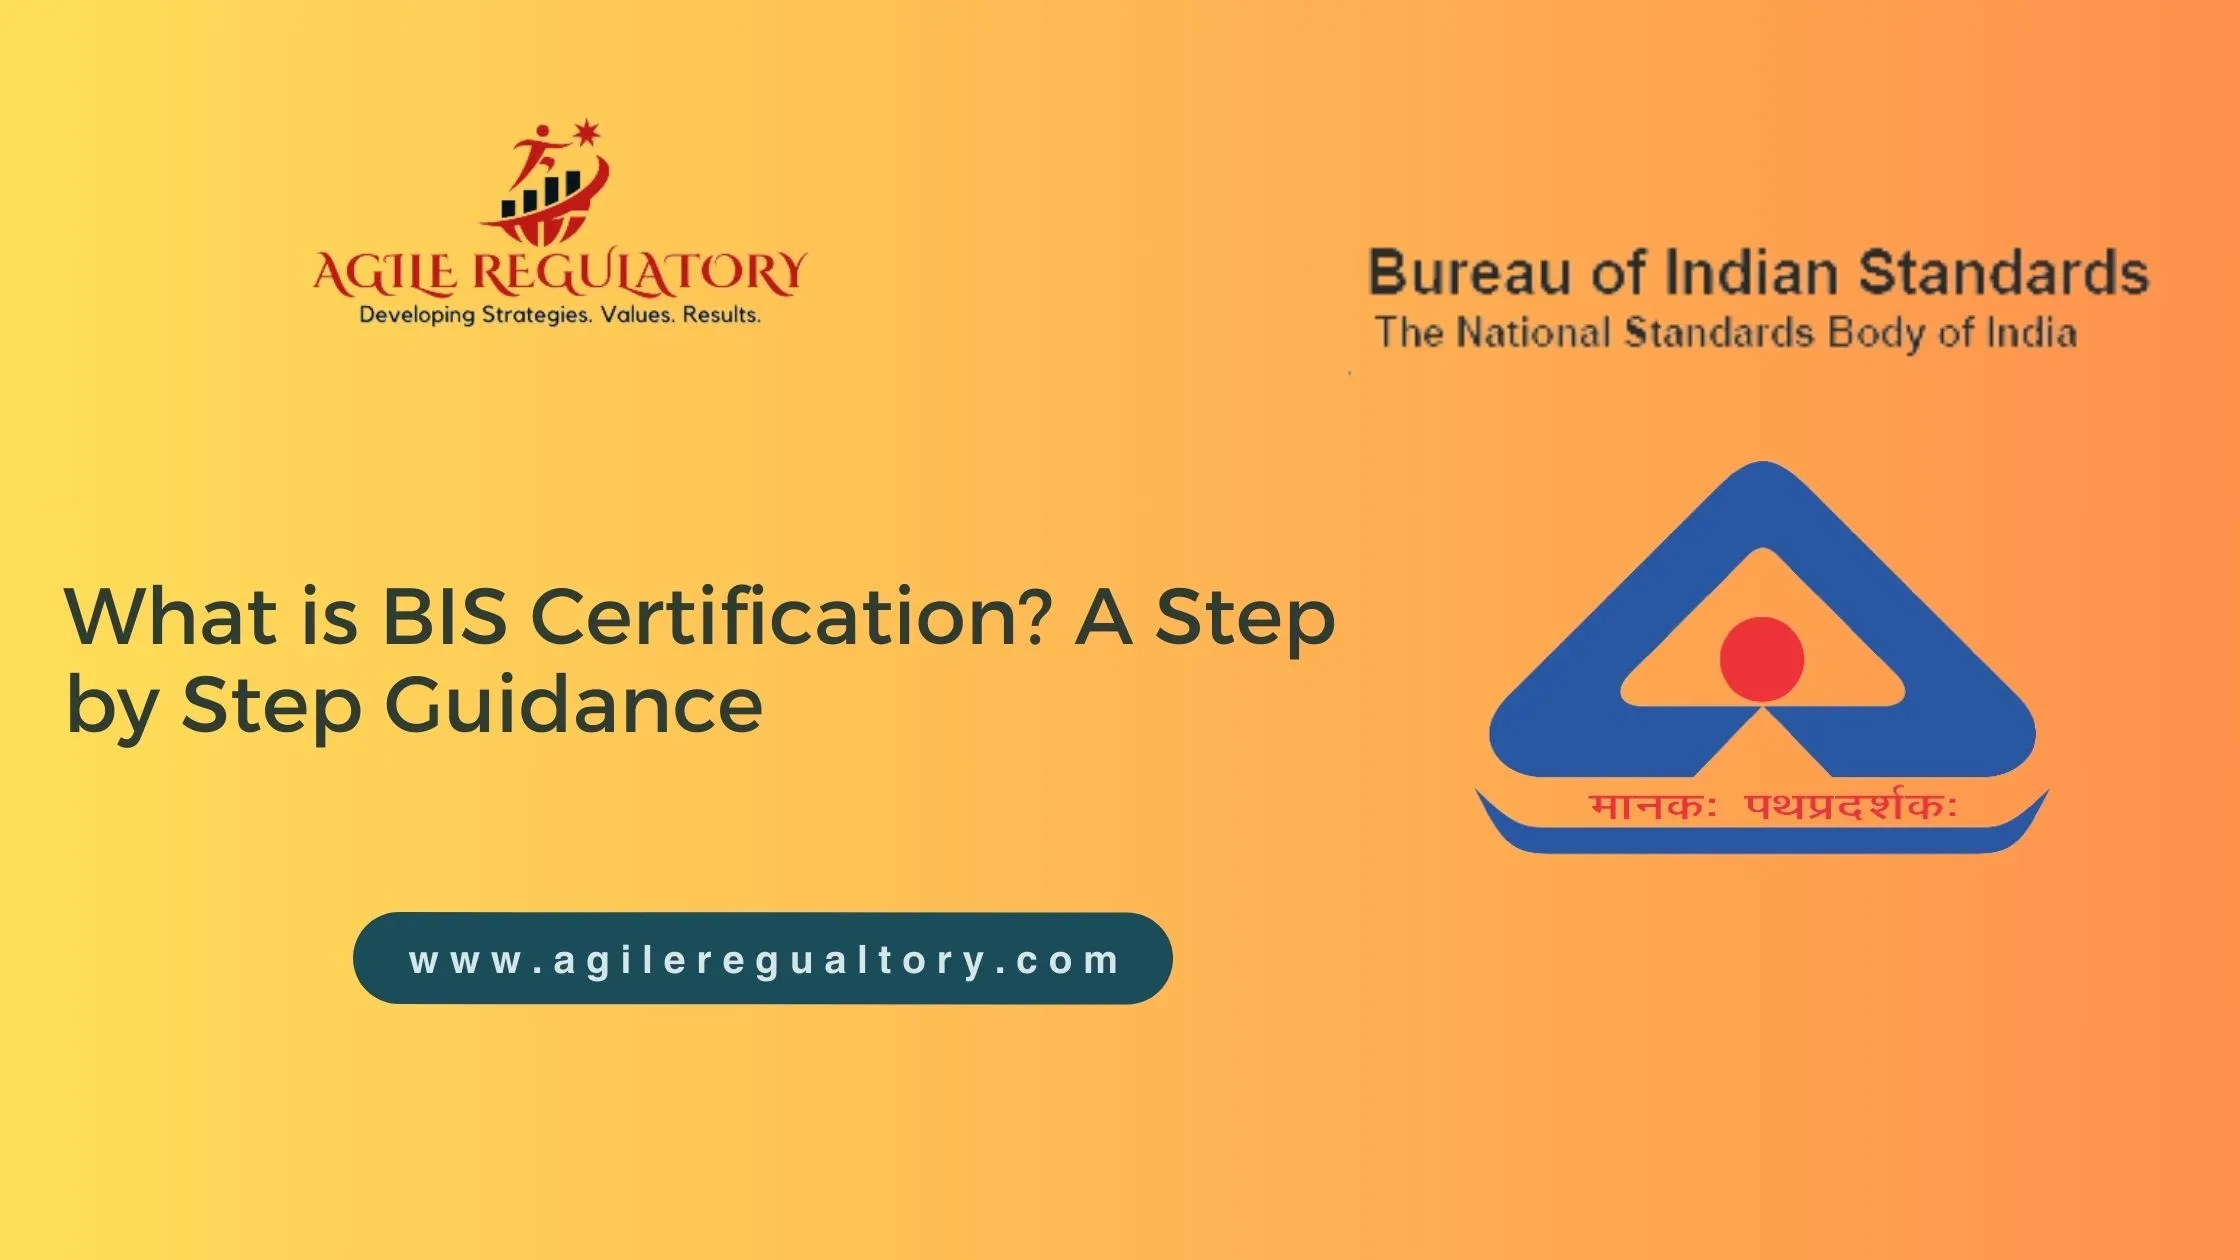 What is BIS Certification?